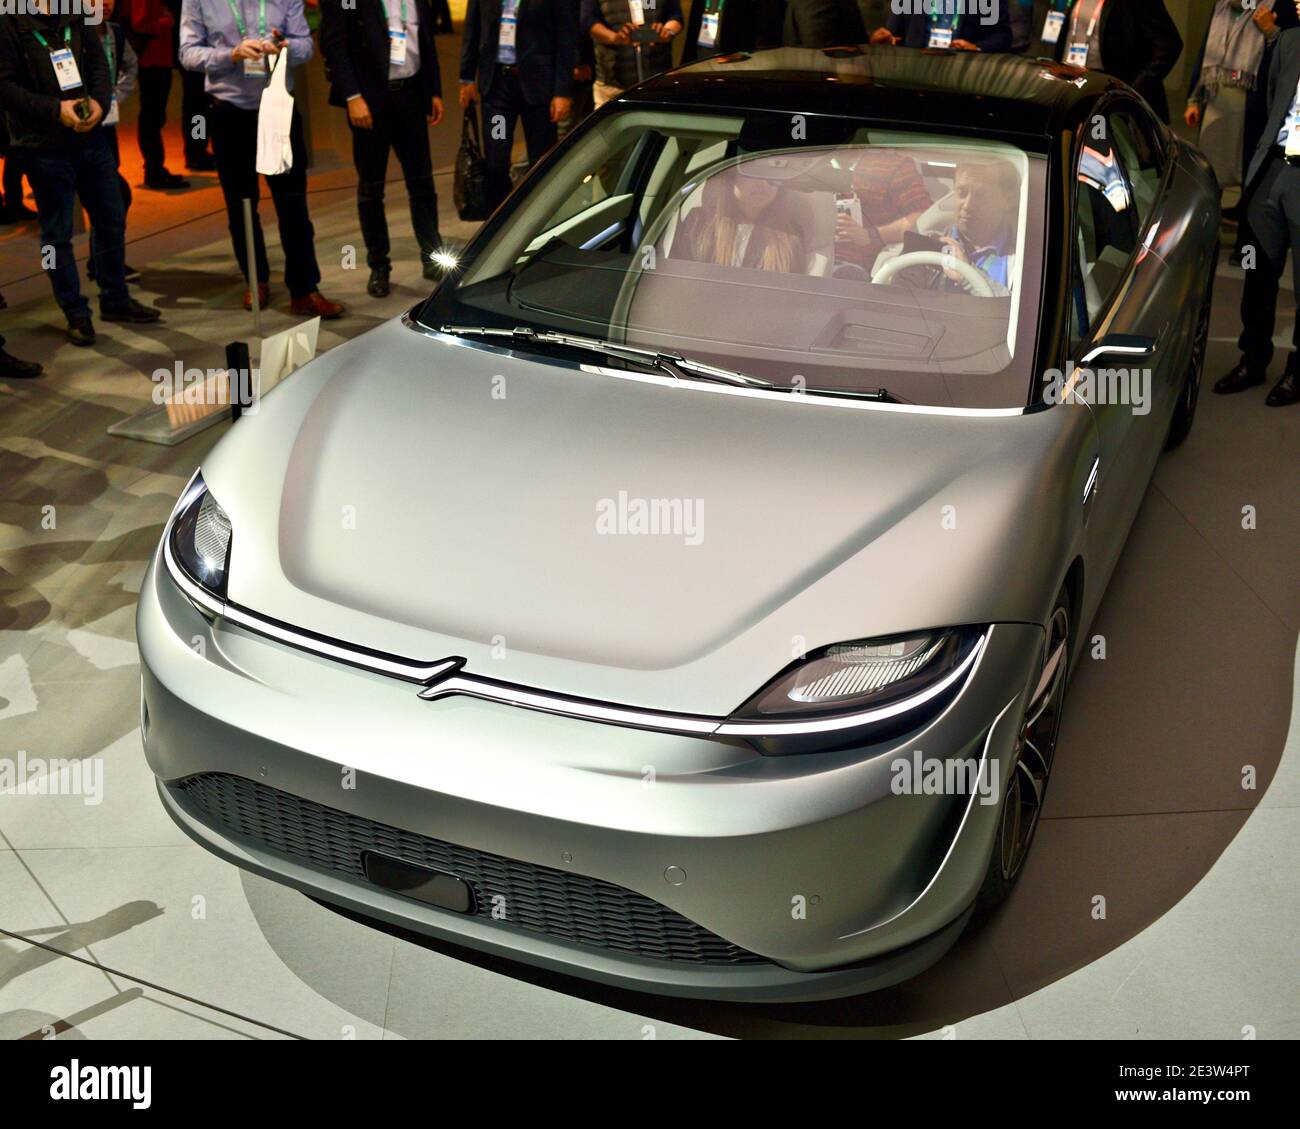 Allelectric Sony VisionS concept electric sedan vehicle on display at